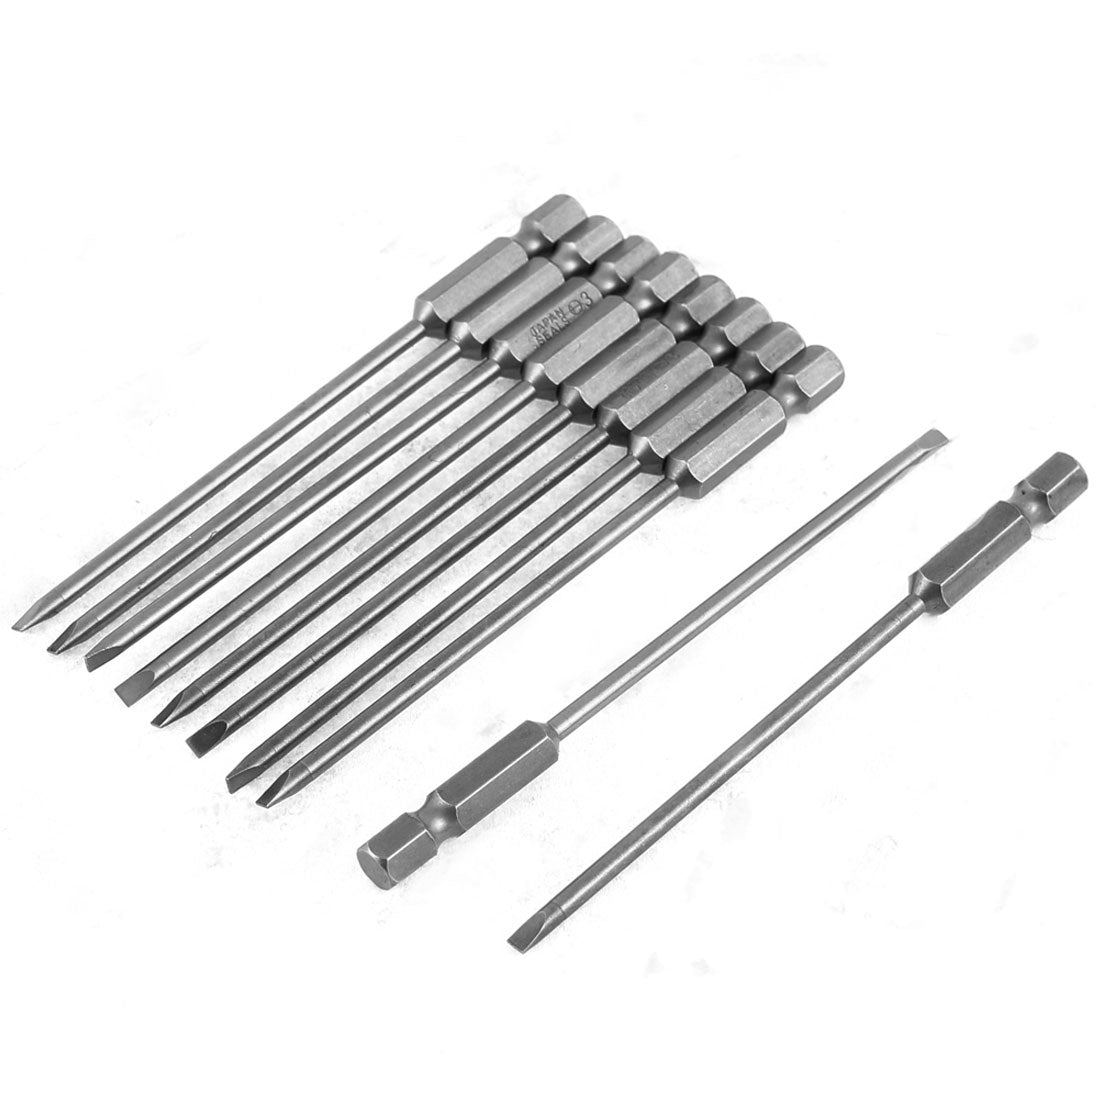 uxcell Uxcell 10pcs 100mm Long 3mm Flat Straight Magnetic Tip Slotted Screwdriver Bits